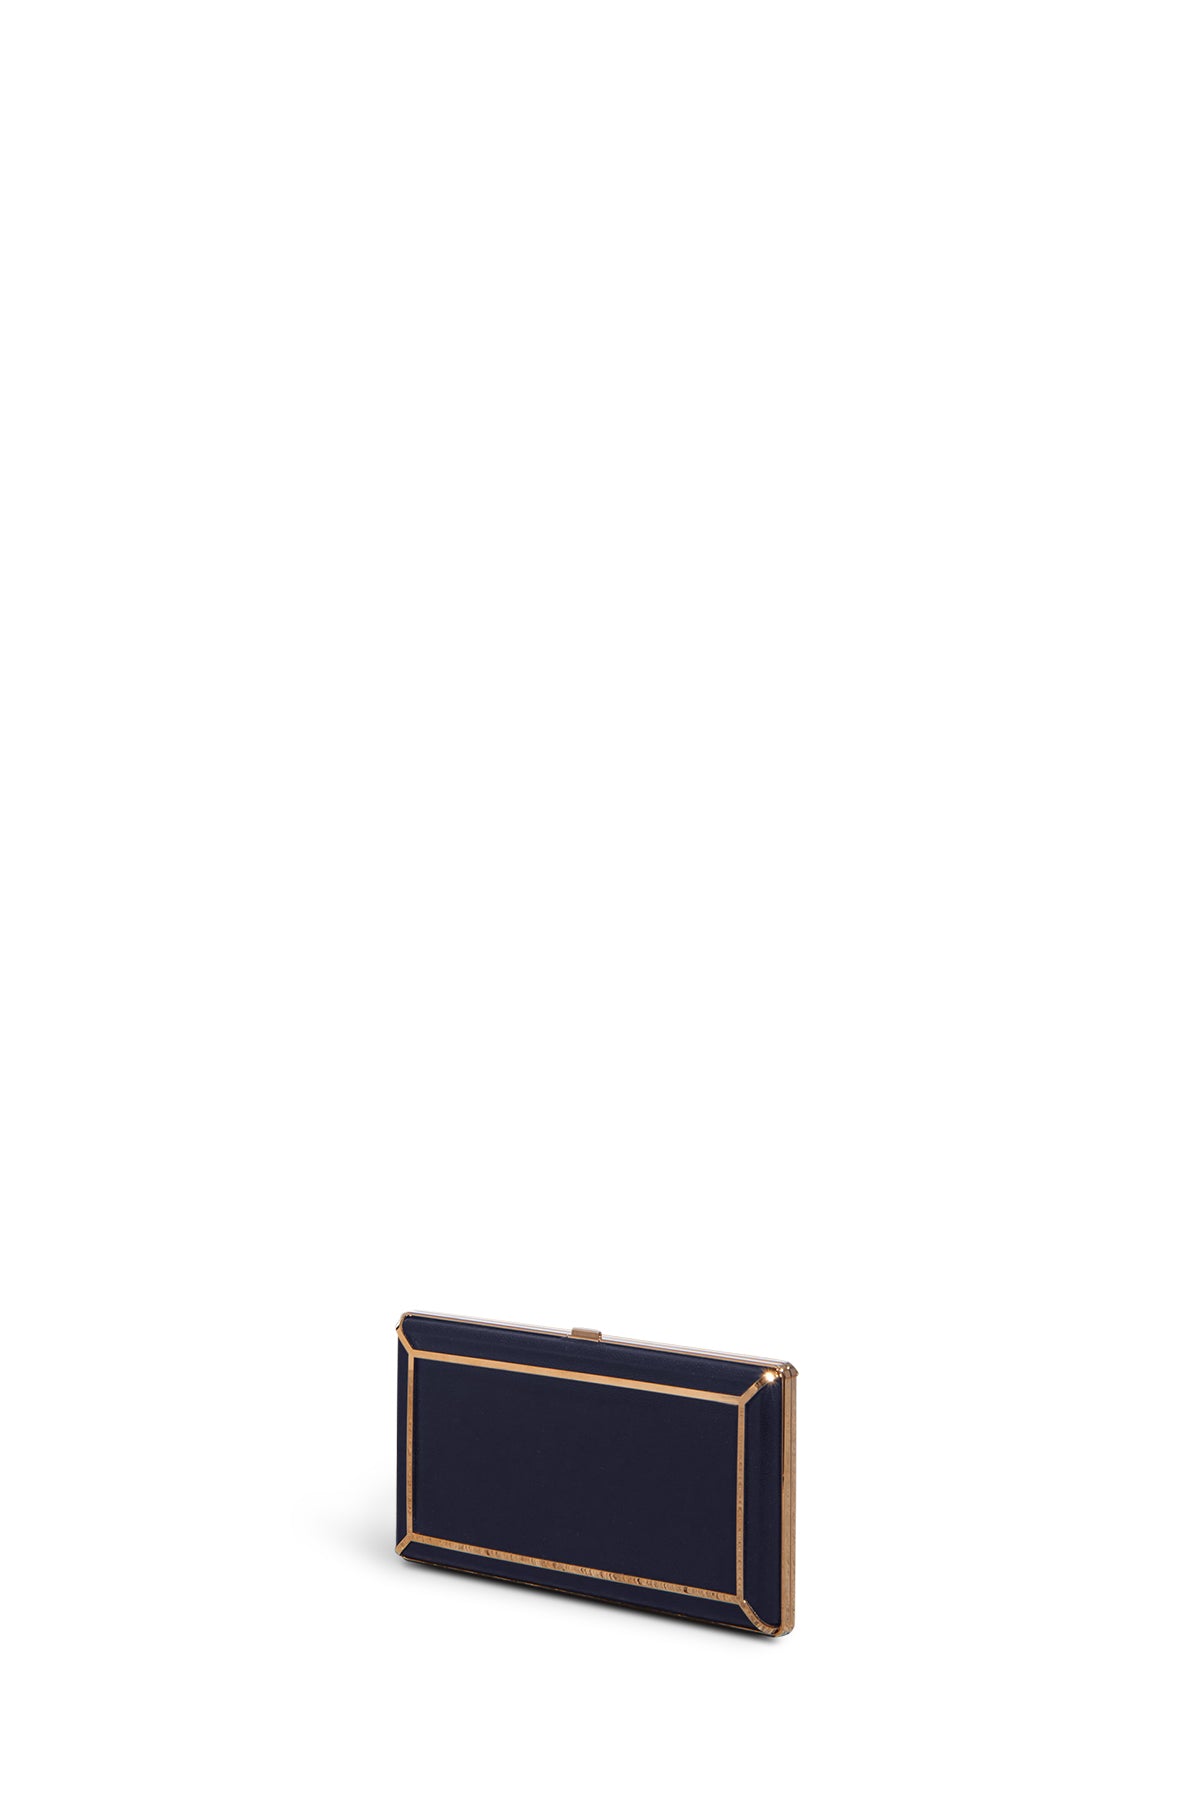 Callas Clutch in Navy Nappa Leather